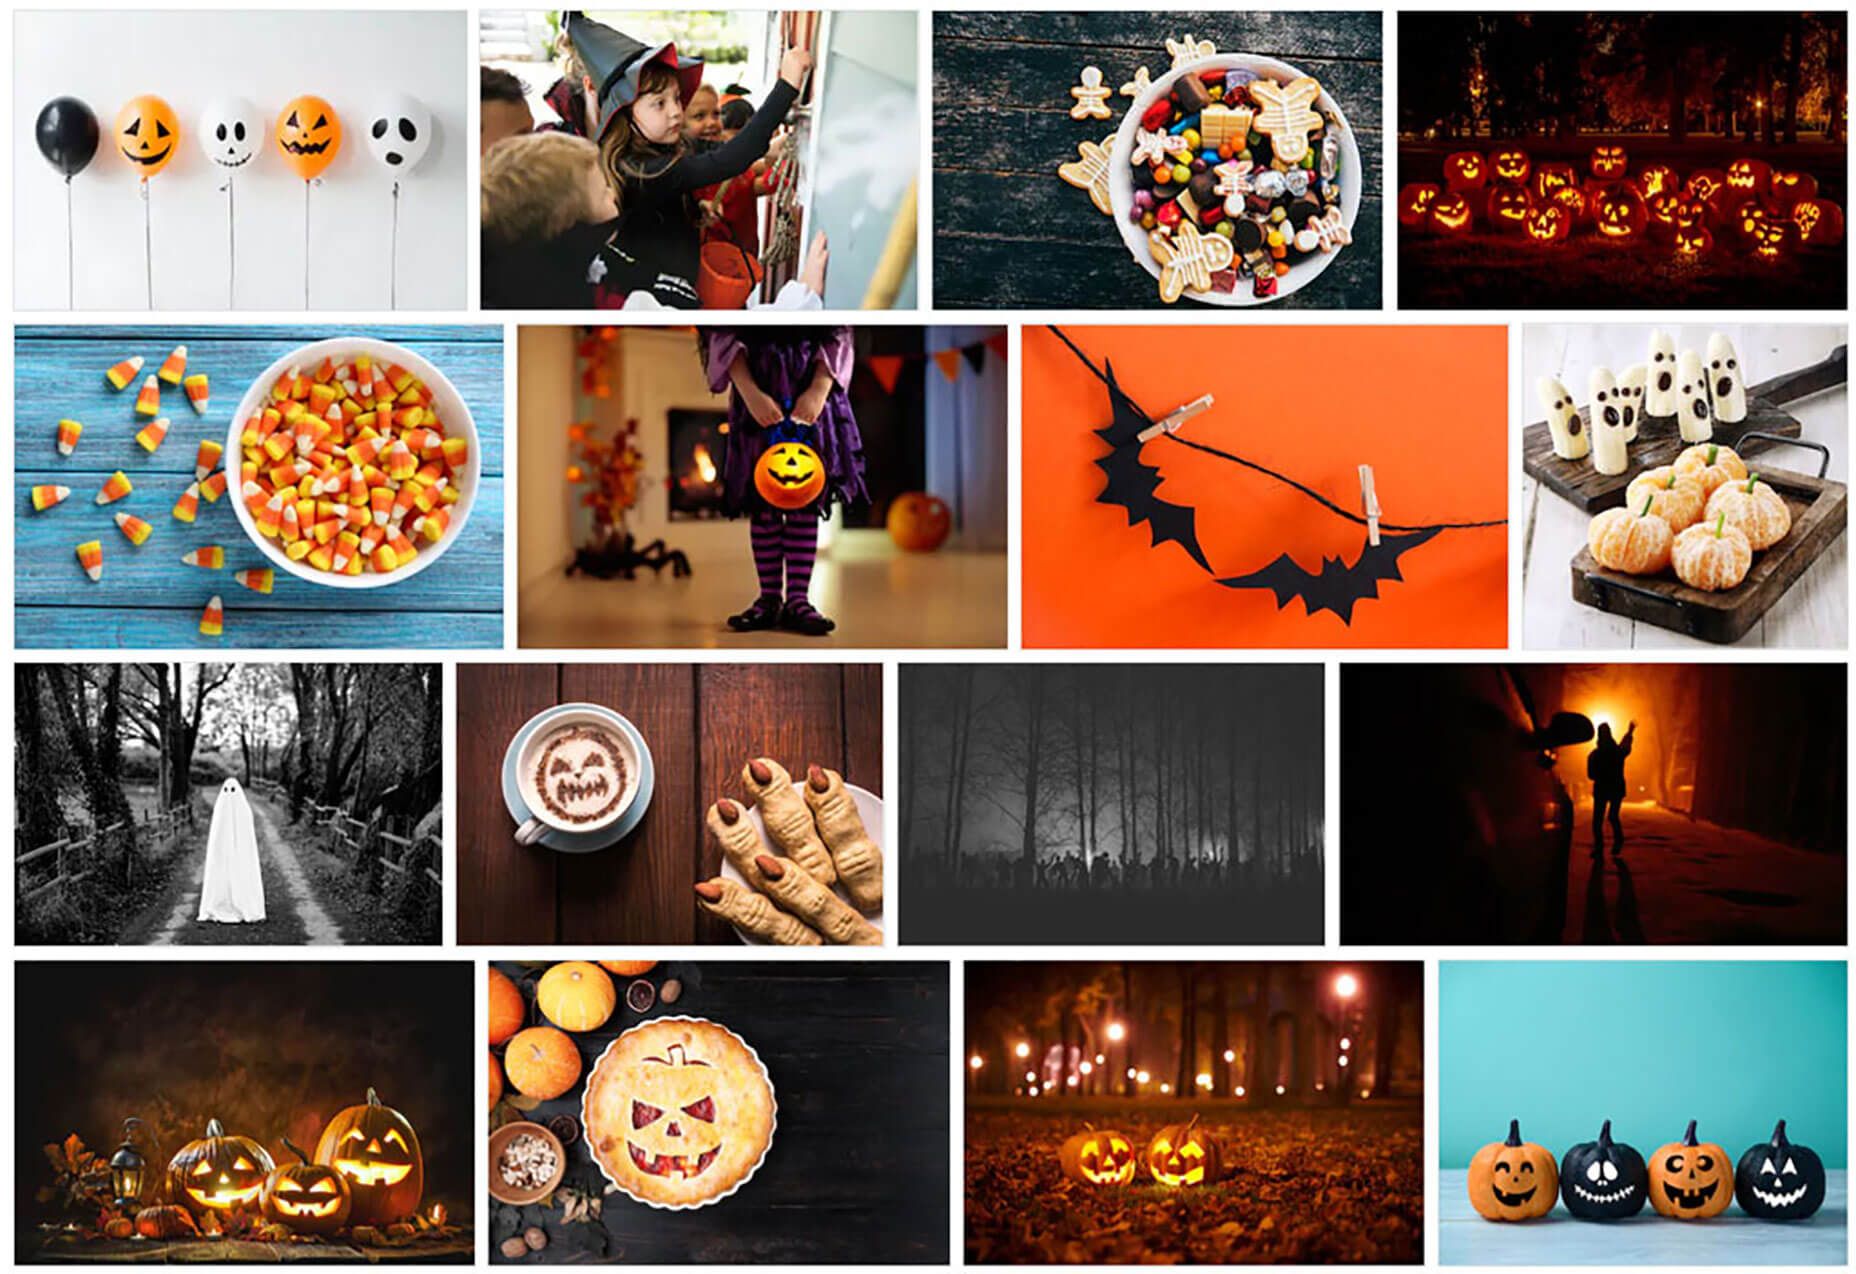 Spooky Designs to Get You Inspired This Halloween